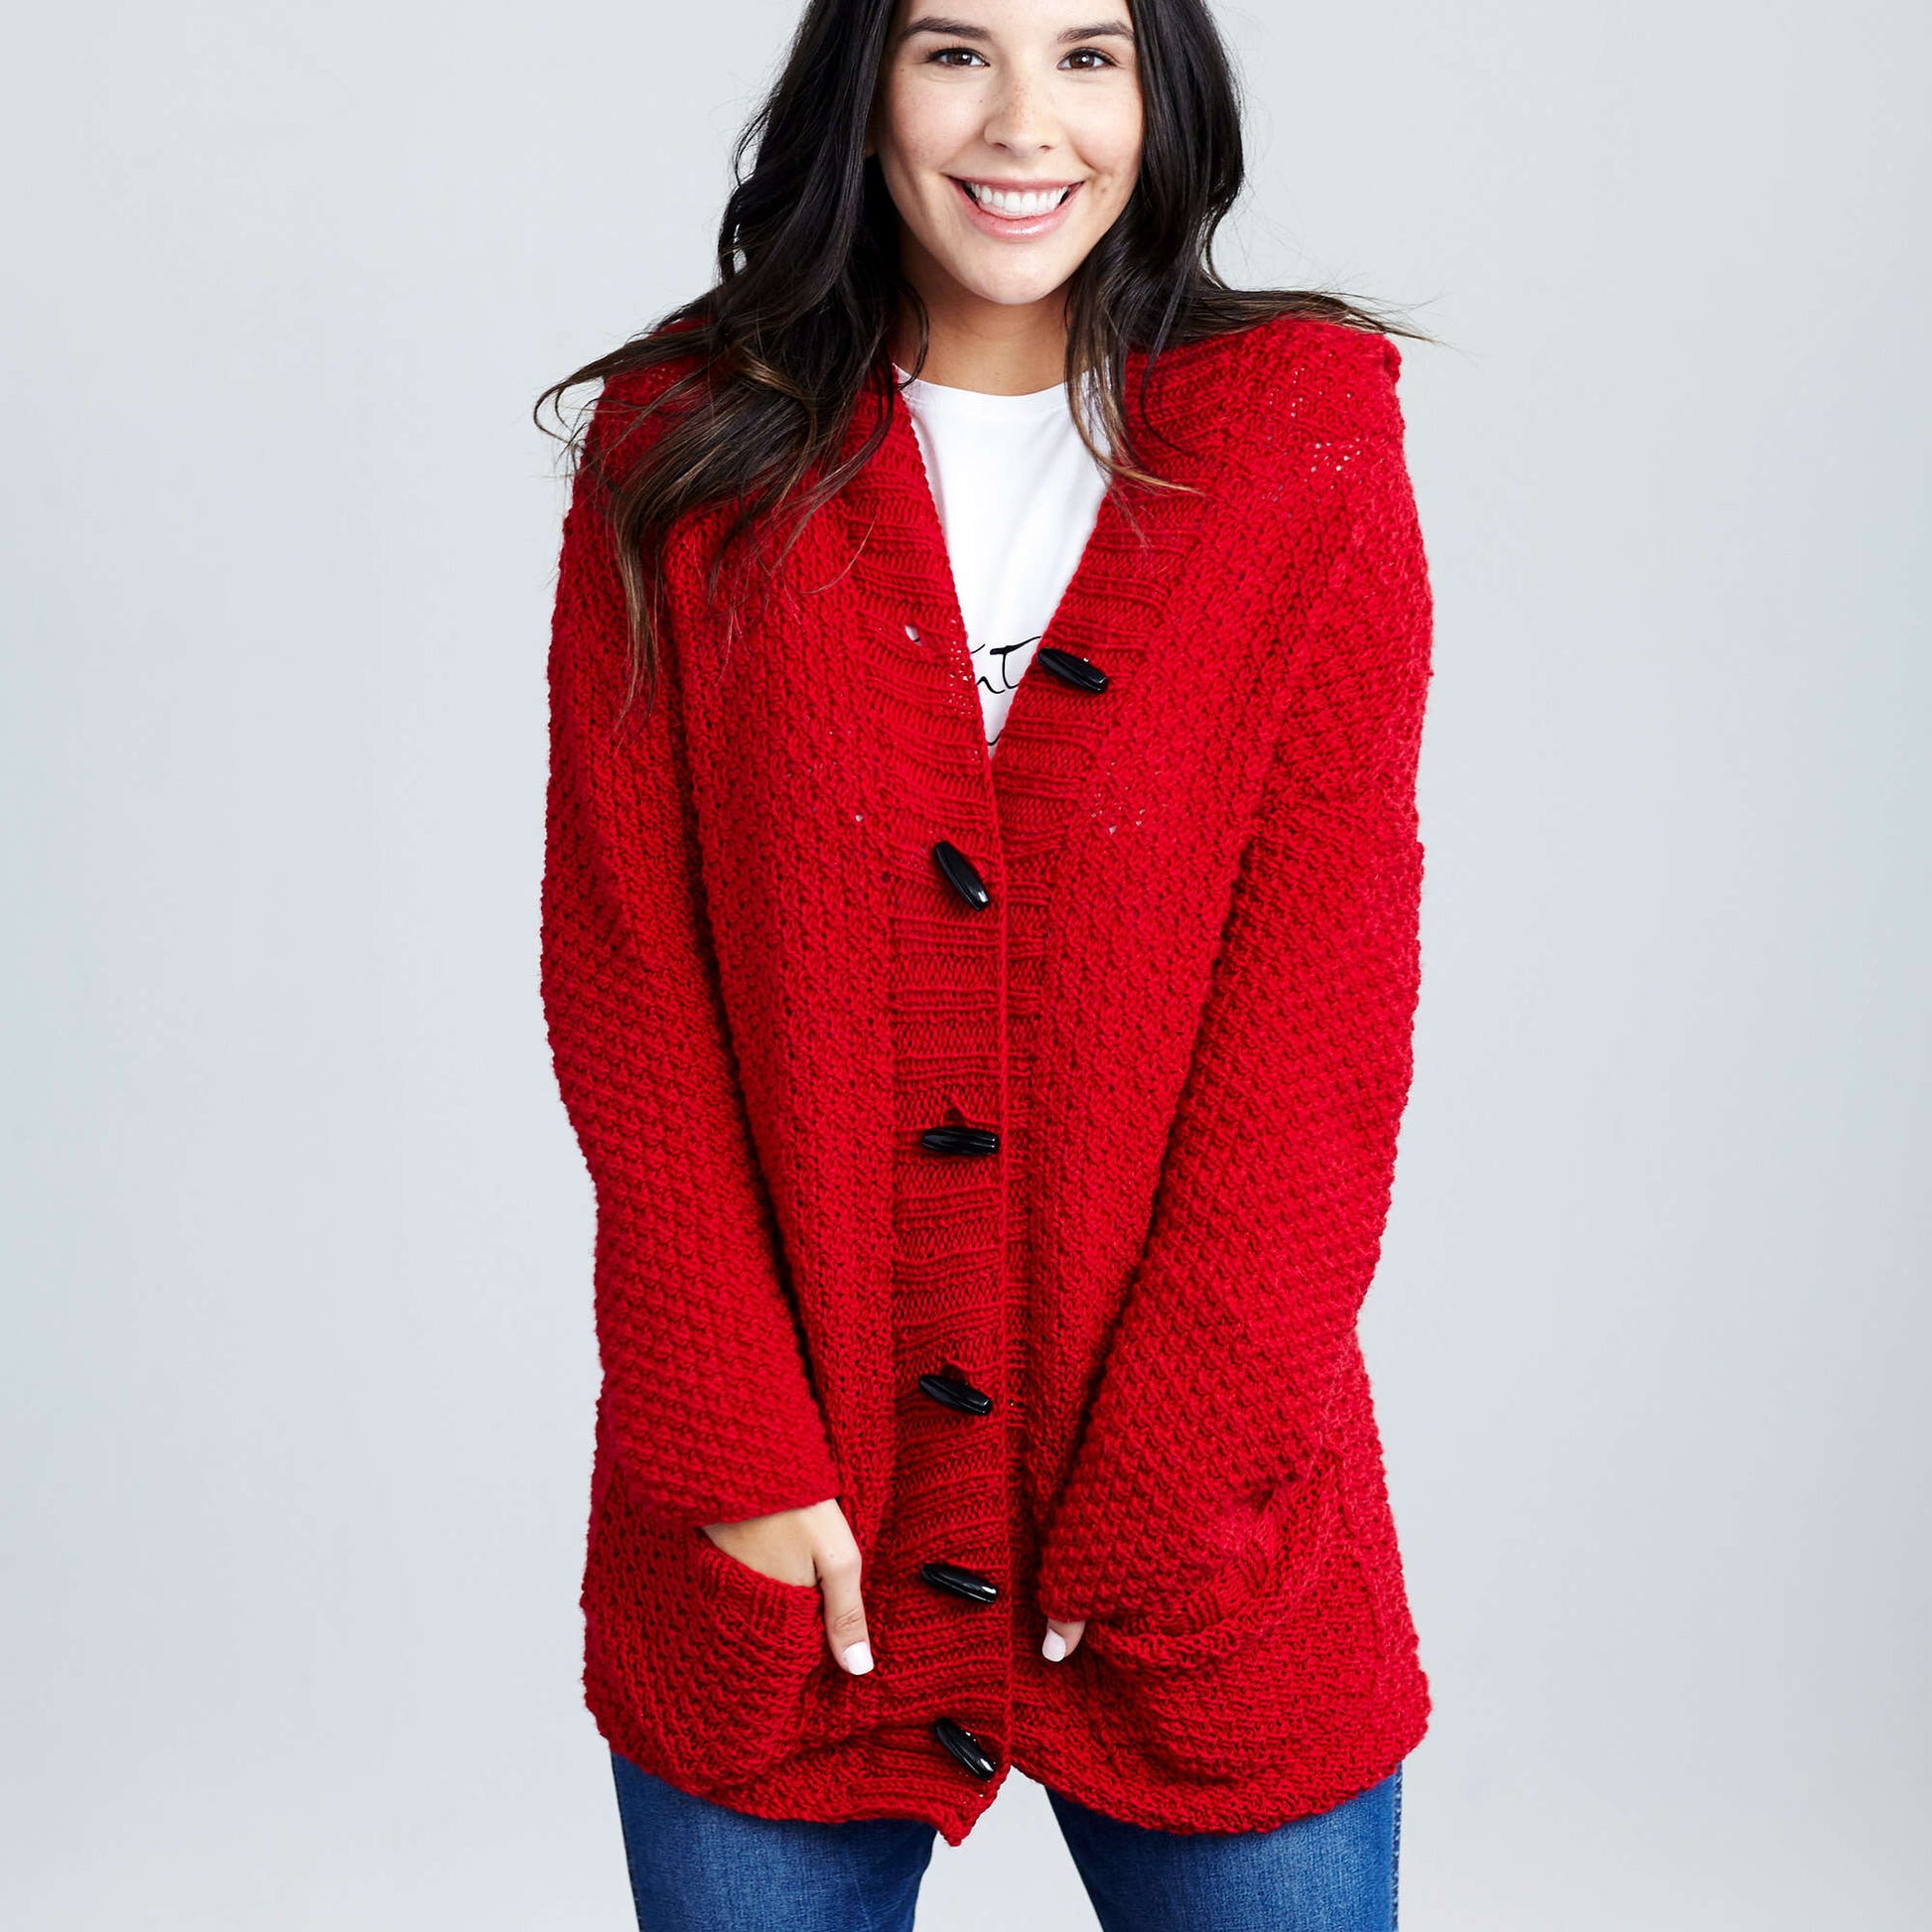 Red Heart Lazy Day Chic Sweater Red Heart Lazy Day Chic Sweater